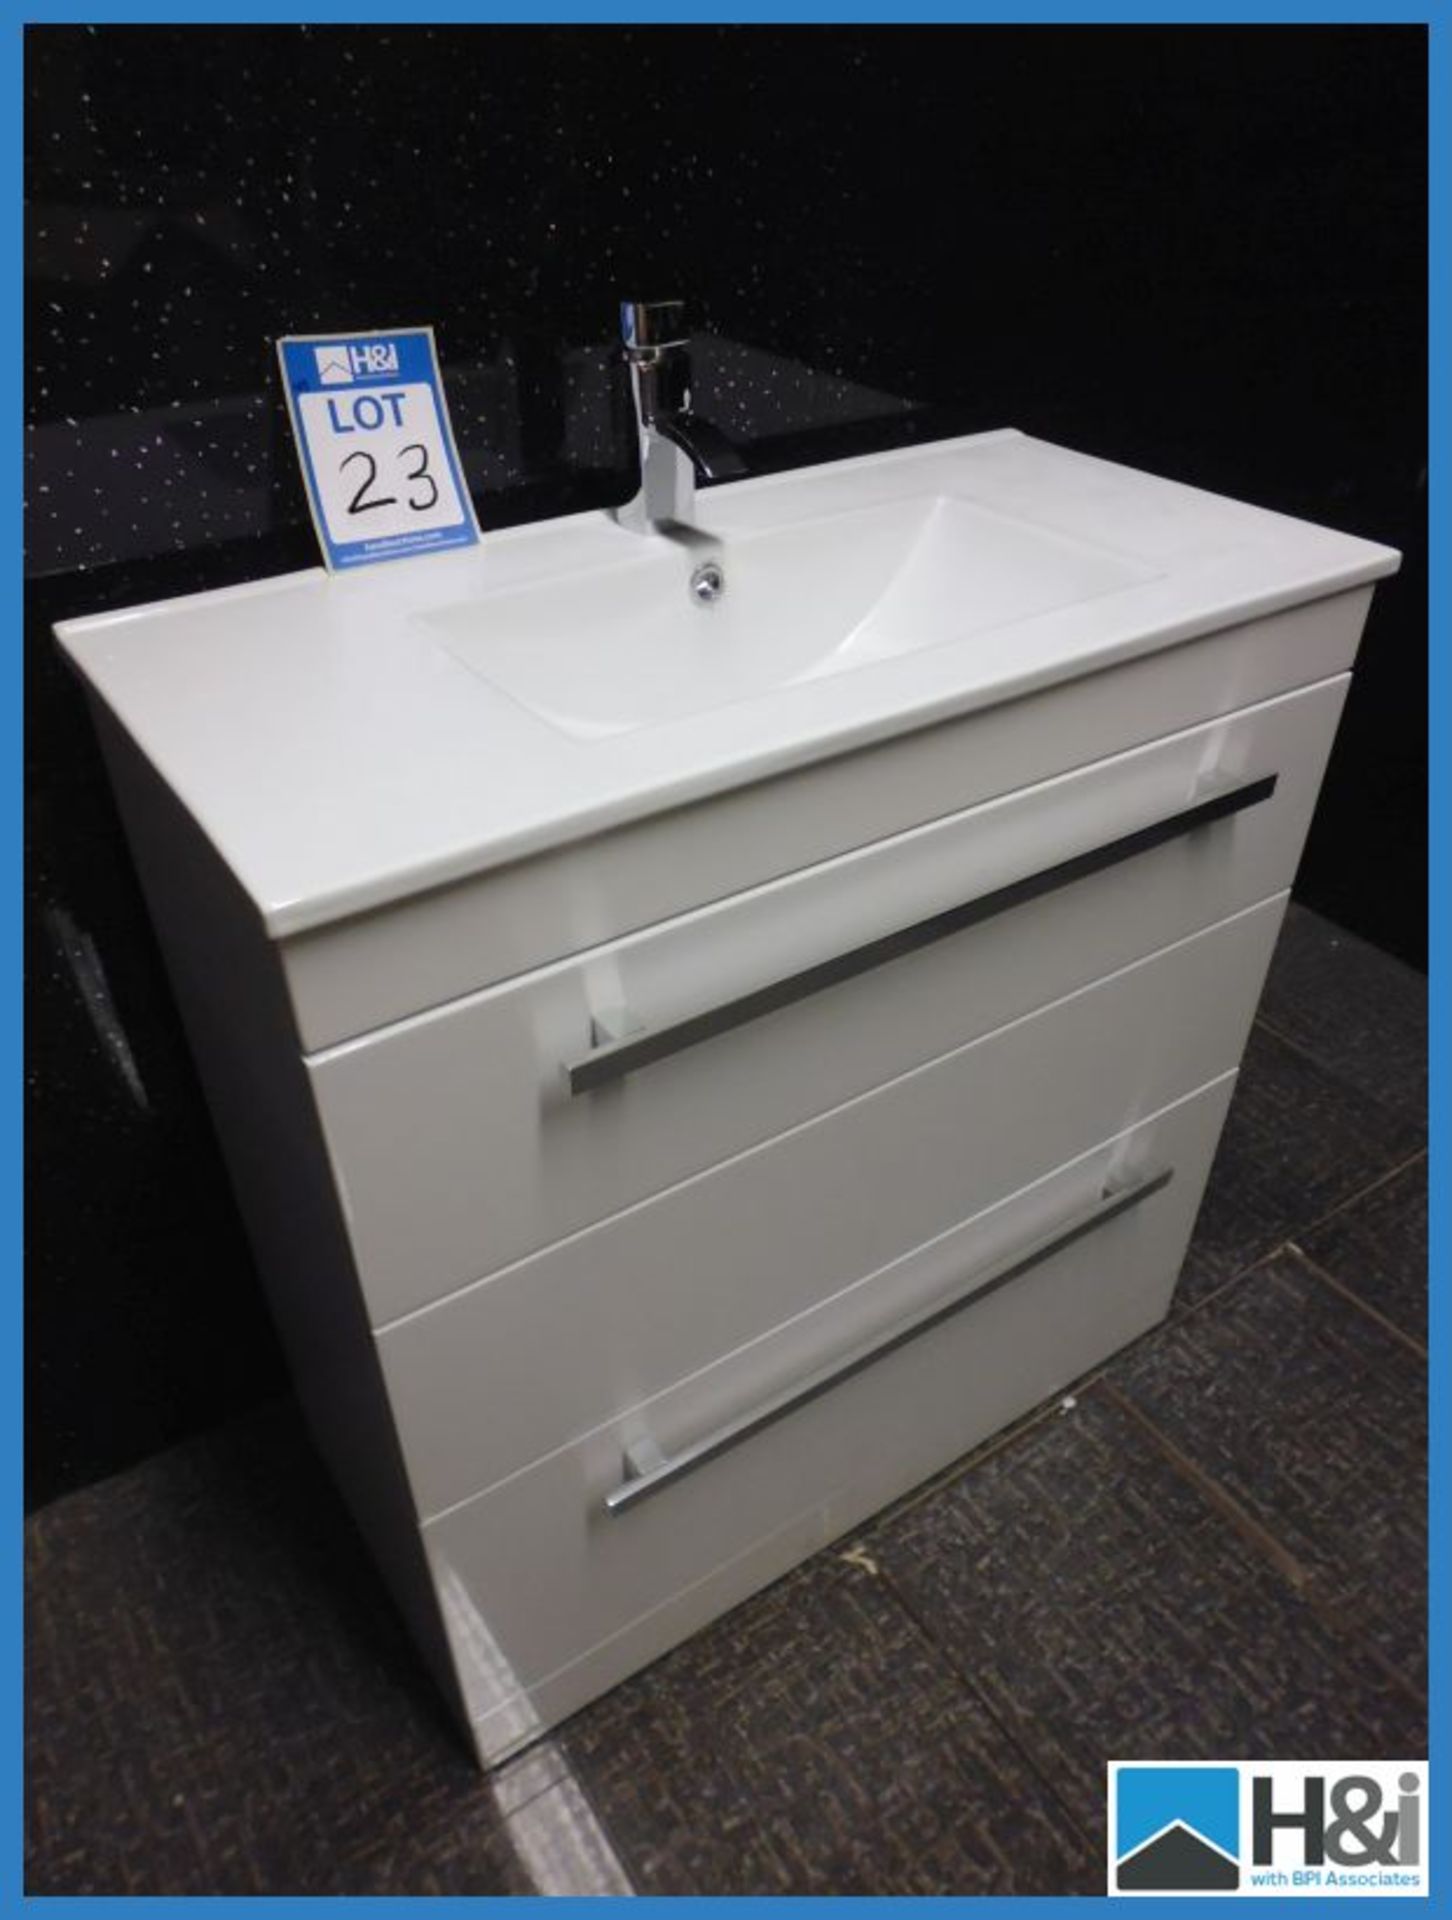 Designer Floor Mounted Minimalist Basin & Cabinet in Gloss White with 2 Soft Close Drawers. Comes